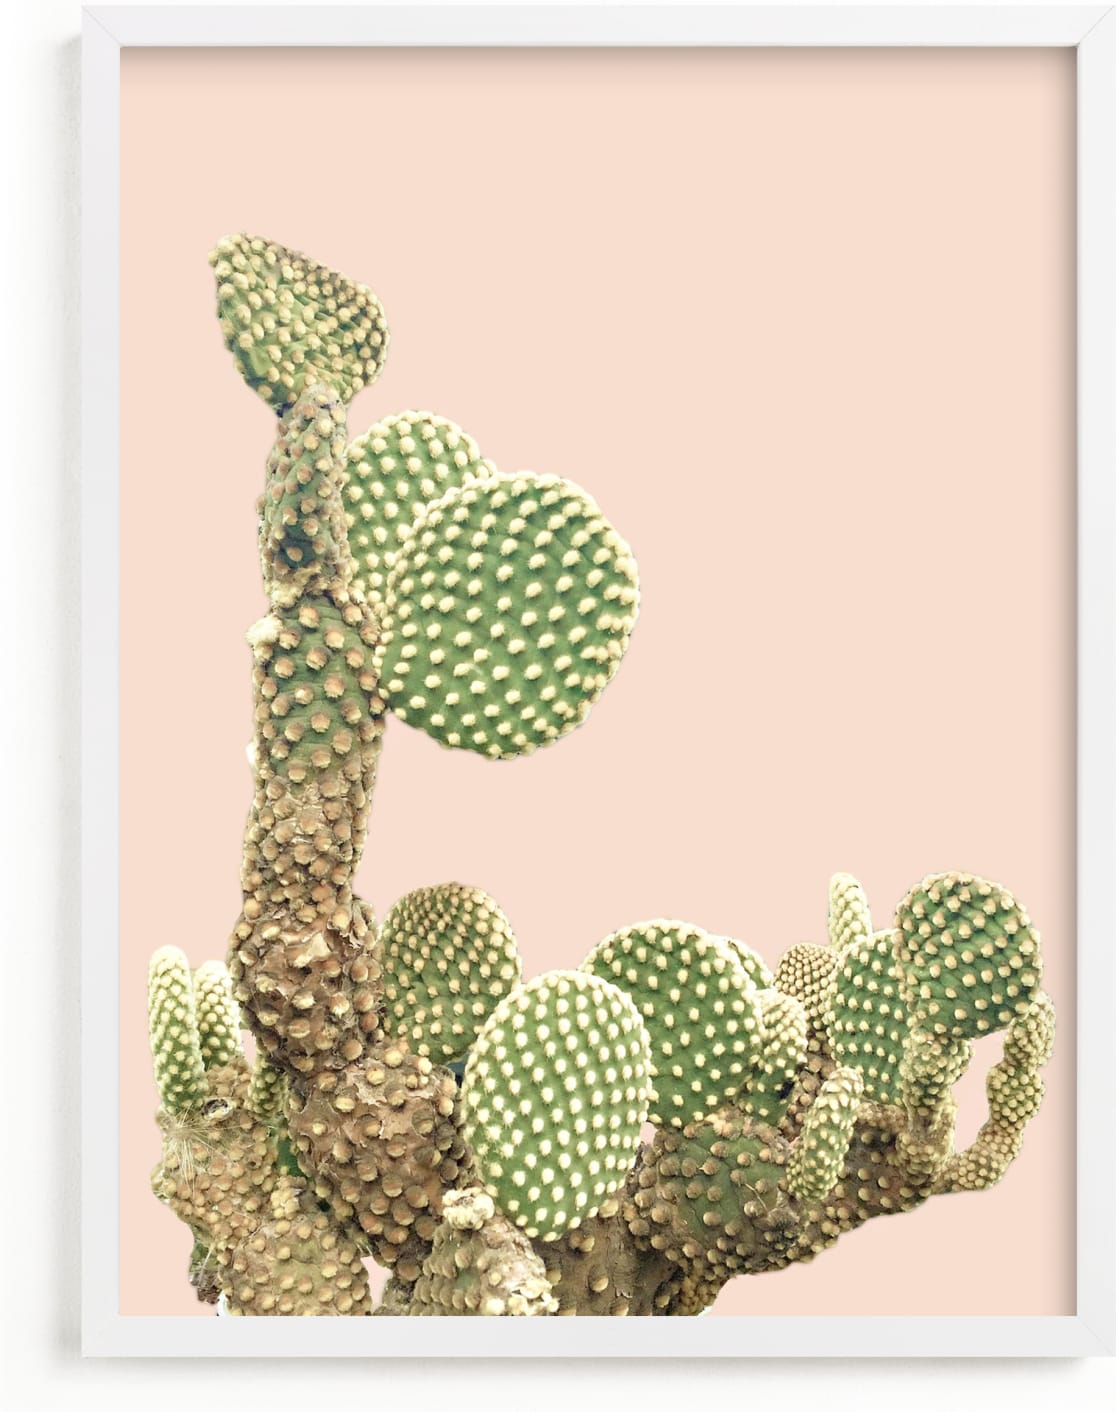 This is a pink art by Baumbirdy called cactus coins.